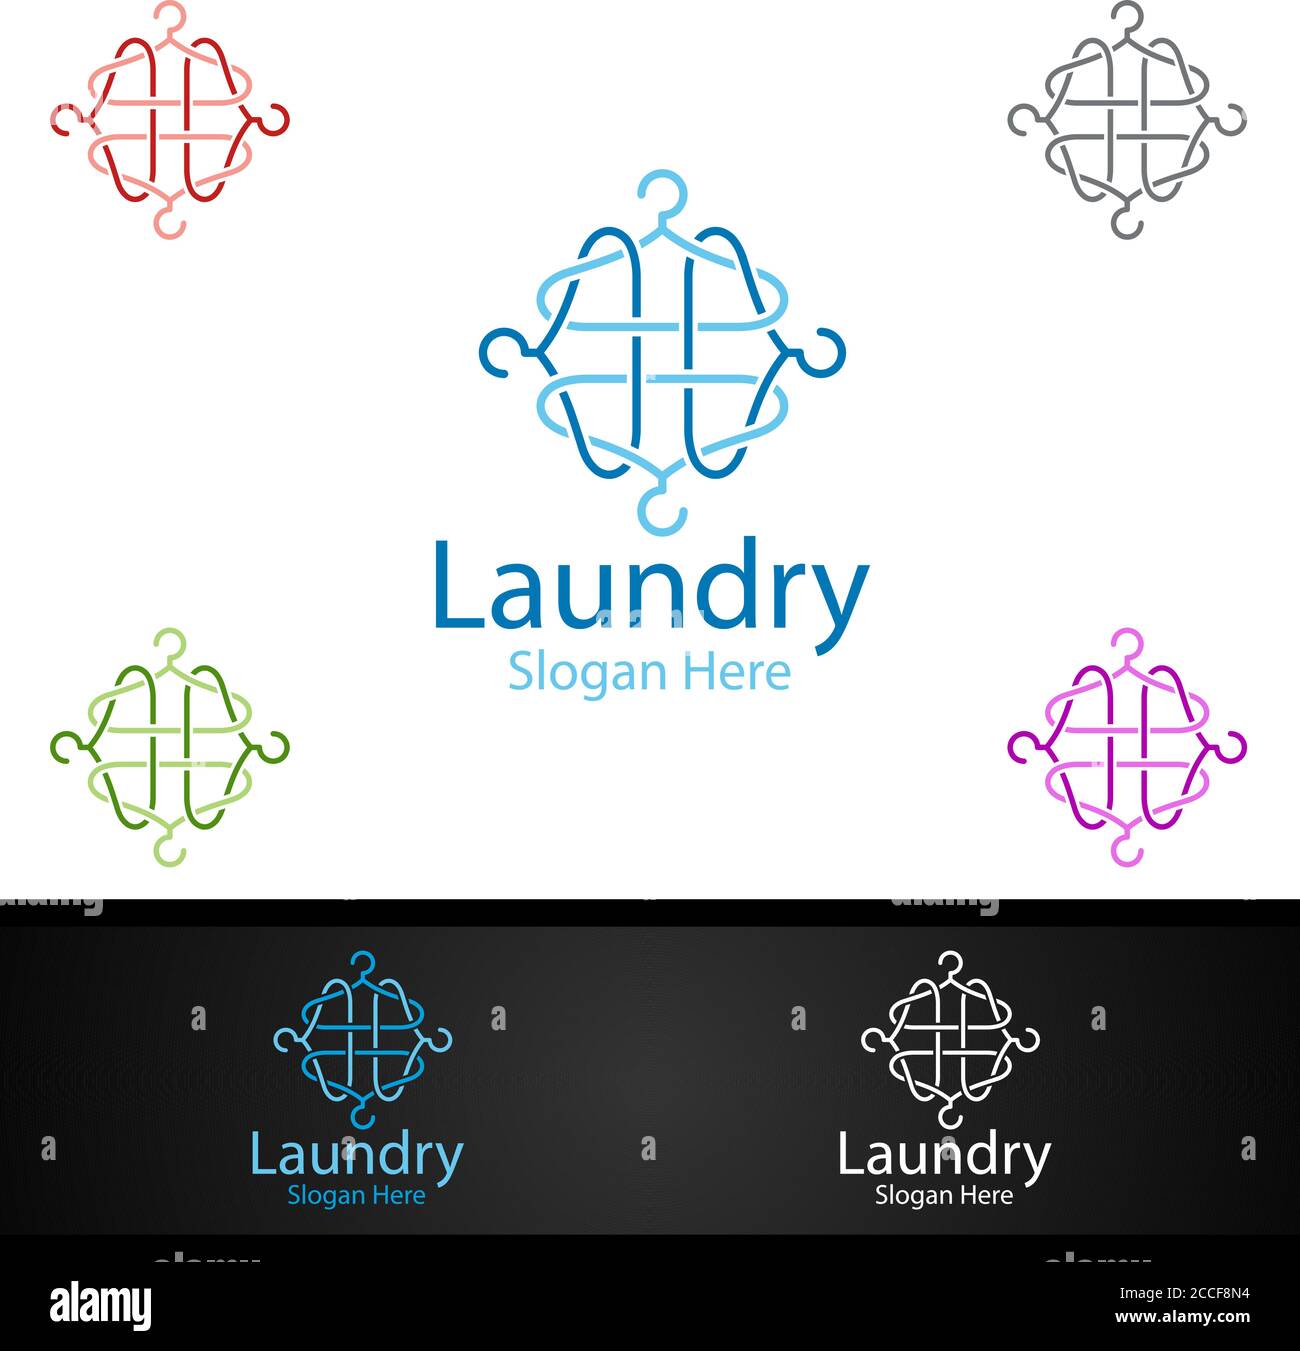 Hangers Laundry Dry Cleaners Logo with Clothes, Water and Washing Concept Design Stock Vector